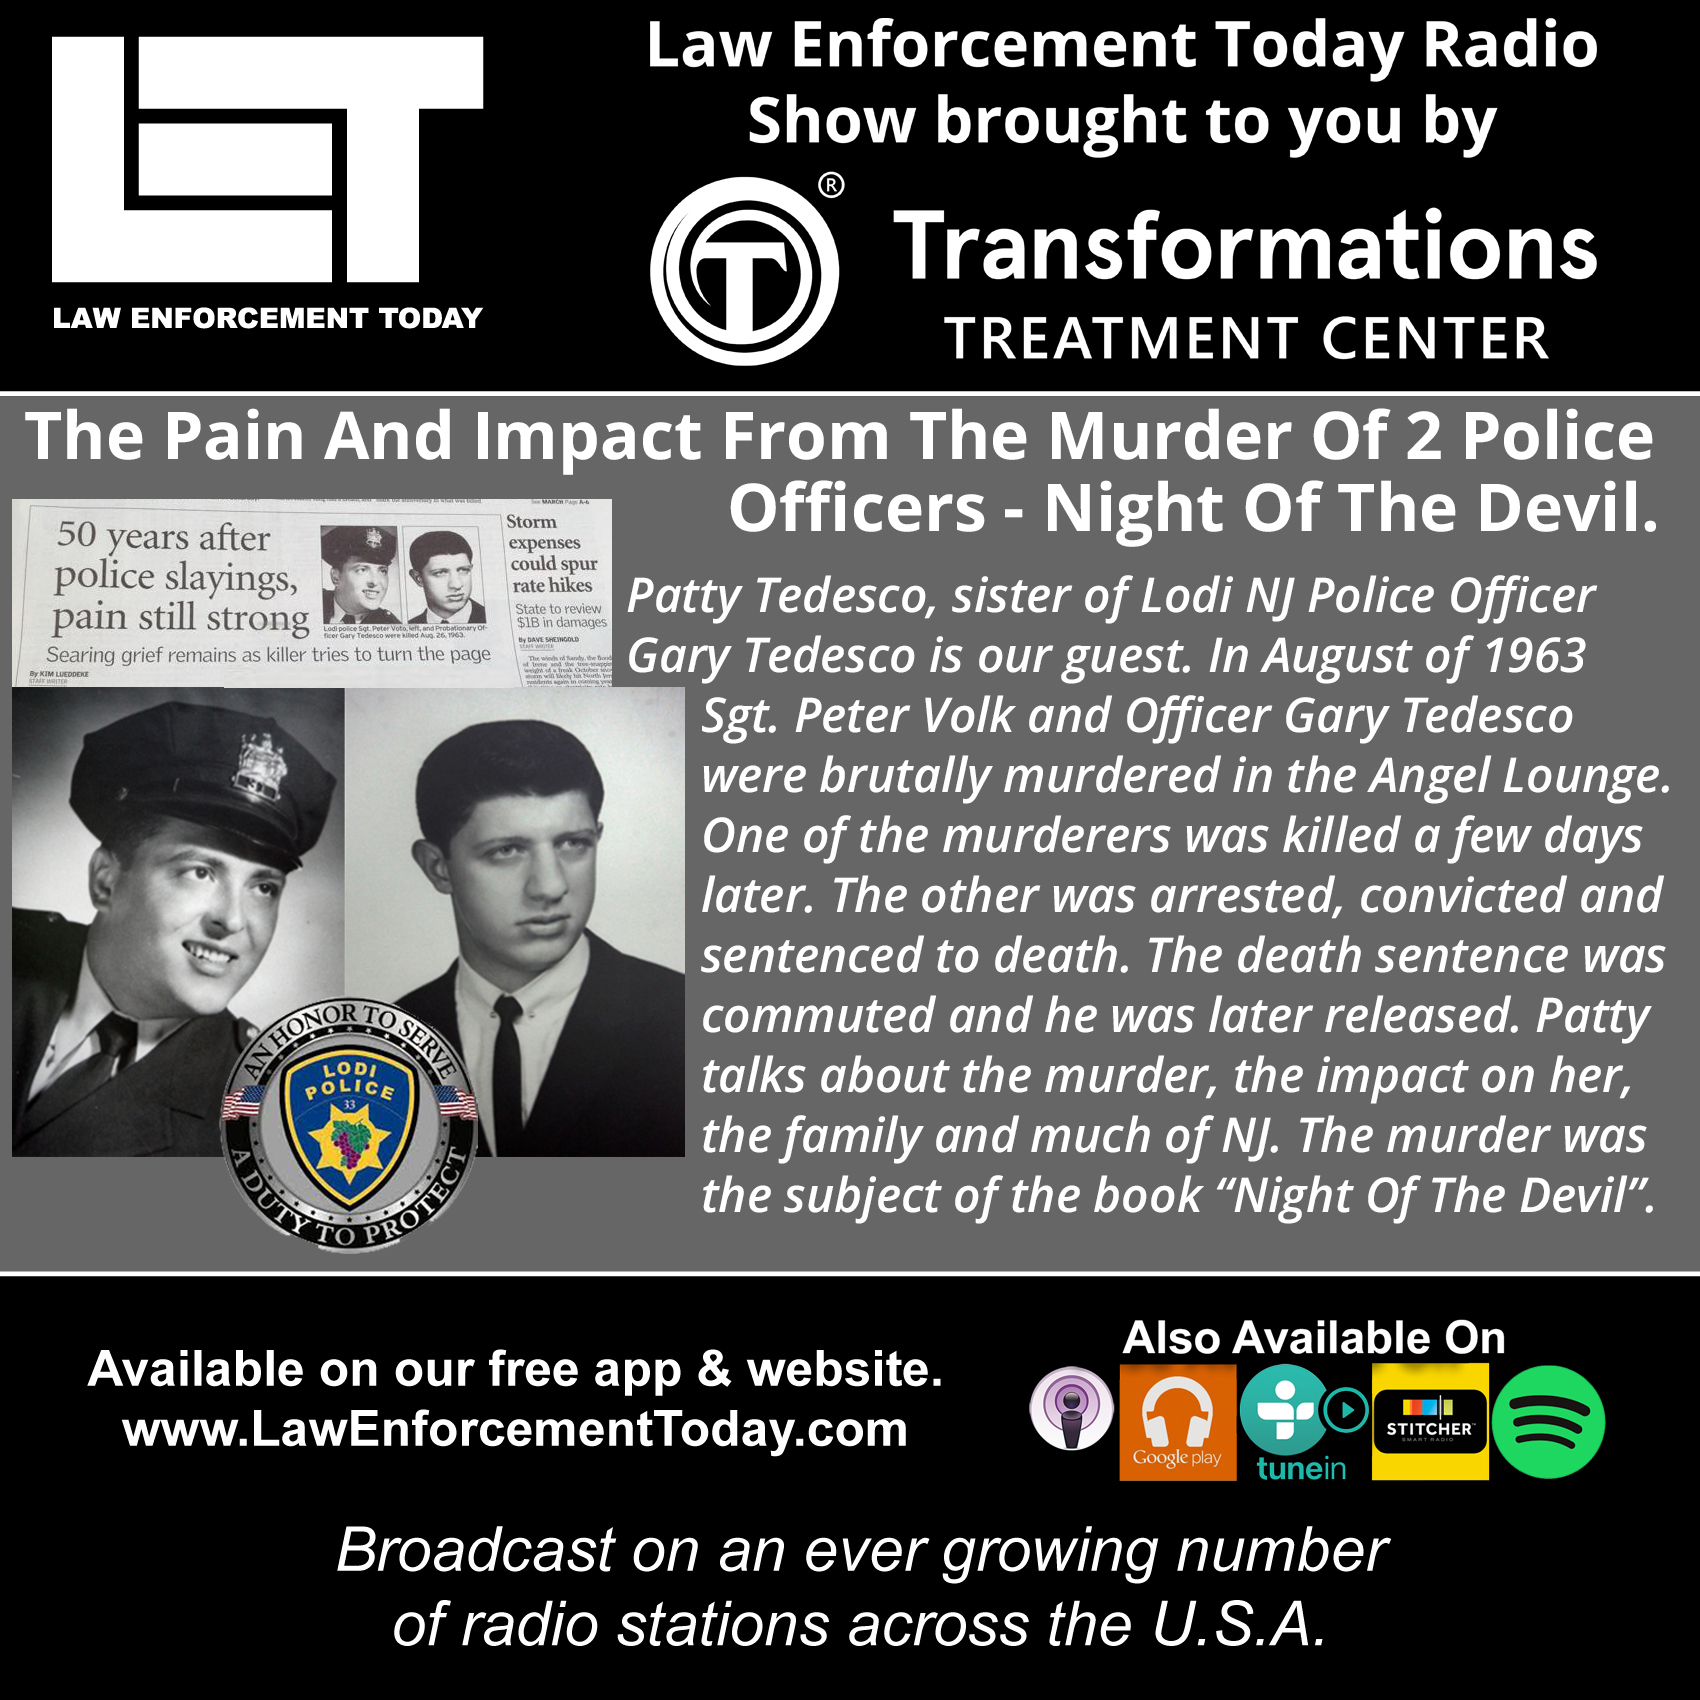 S4E10: Murder Of 2 Police Officers - Night Of The Devil.